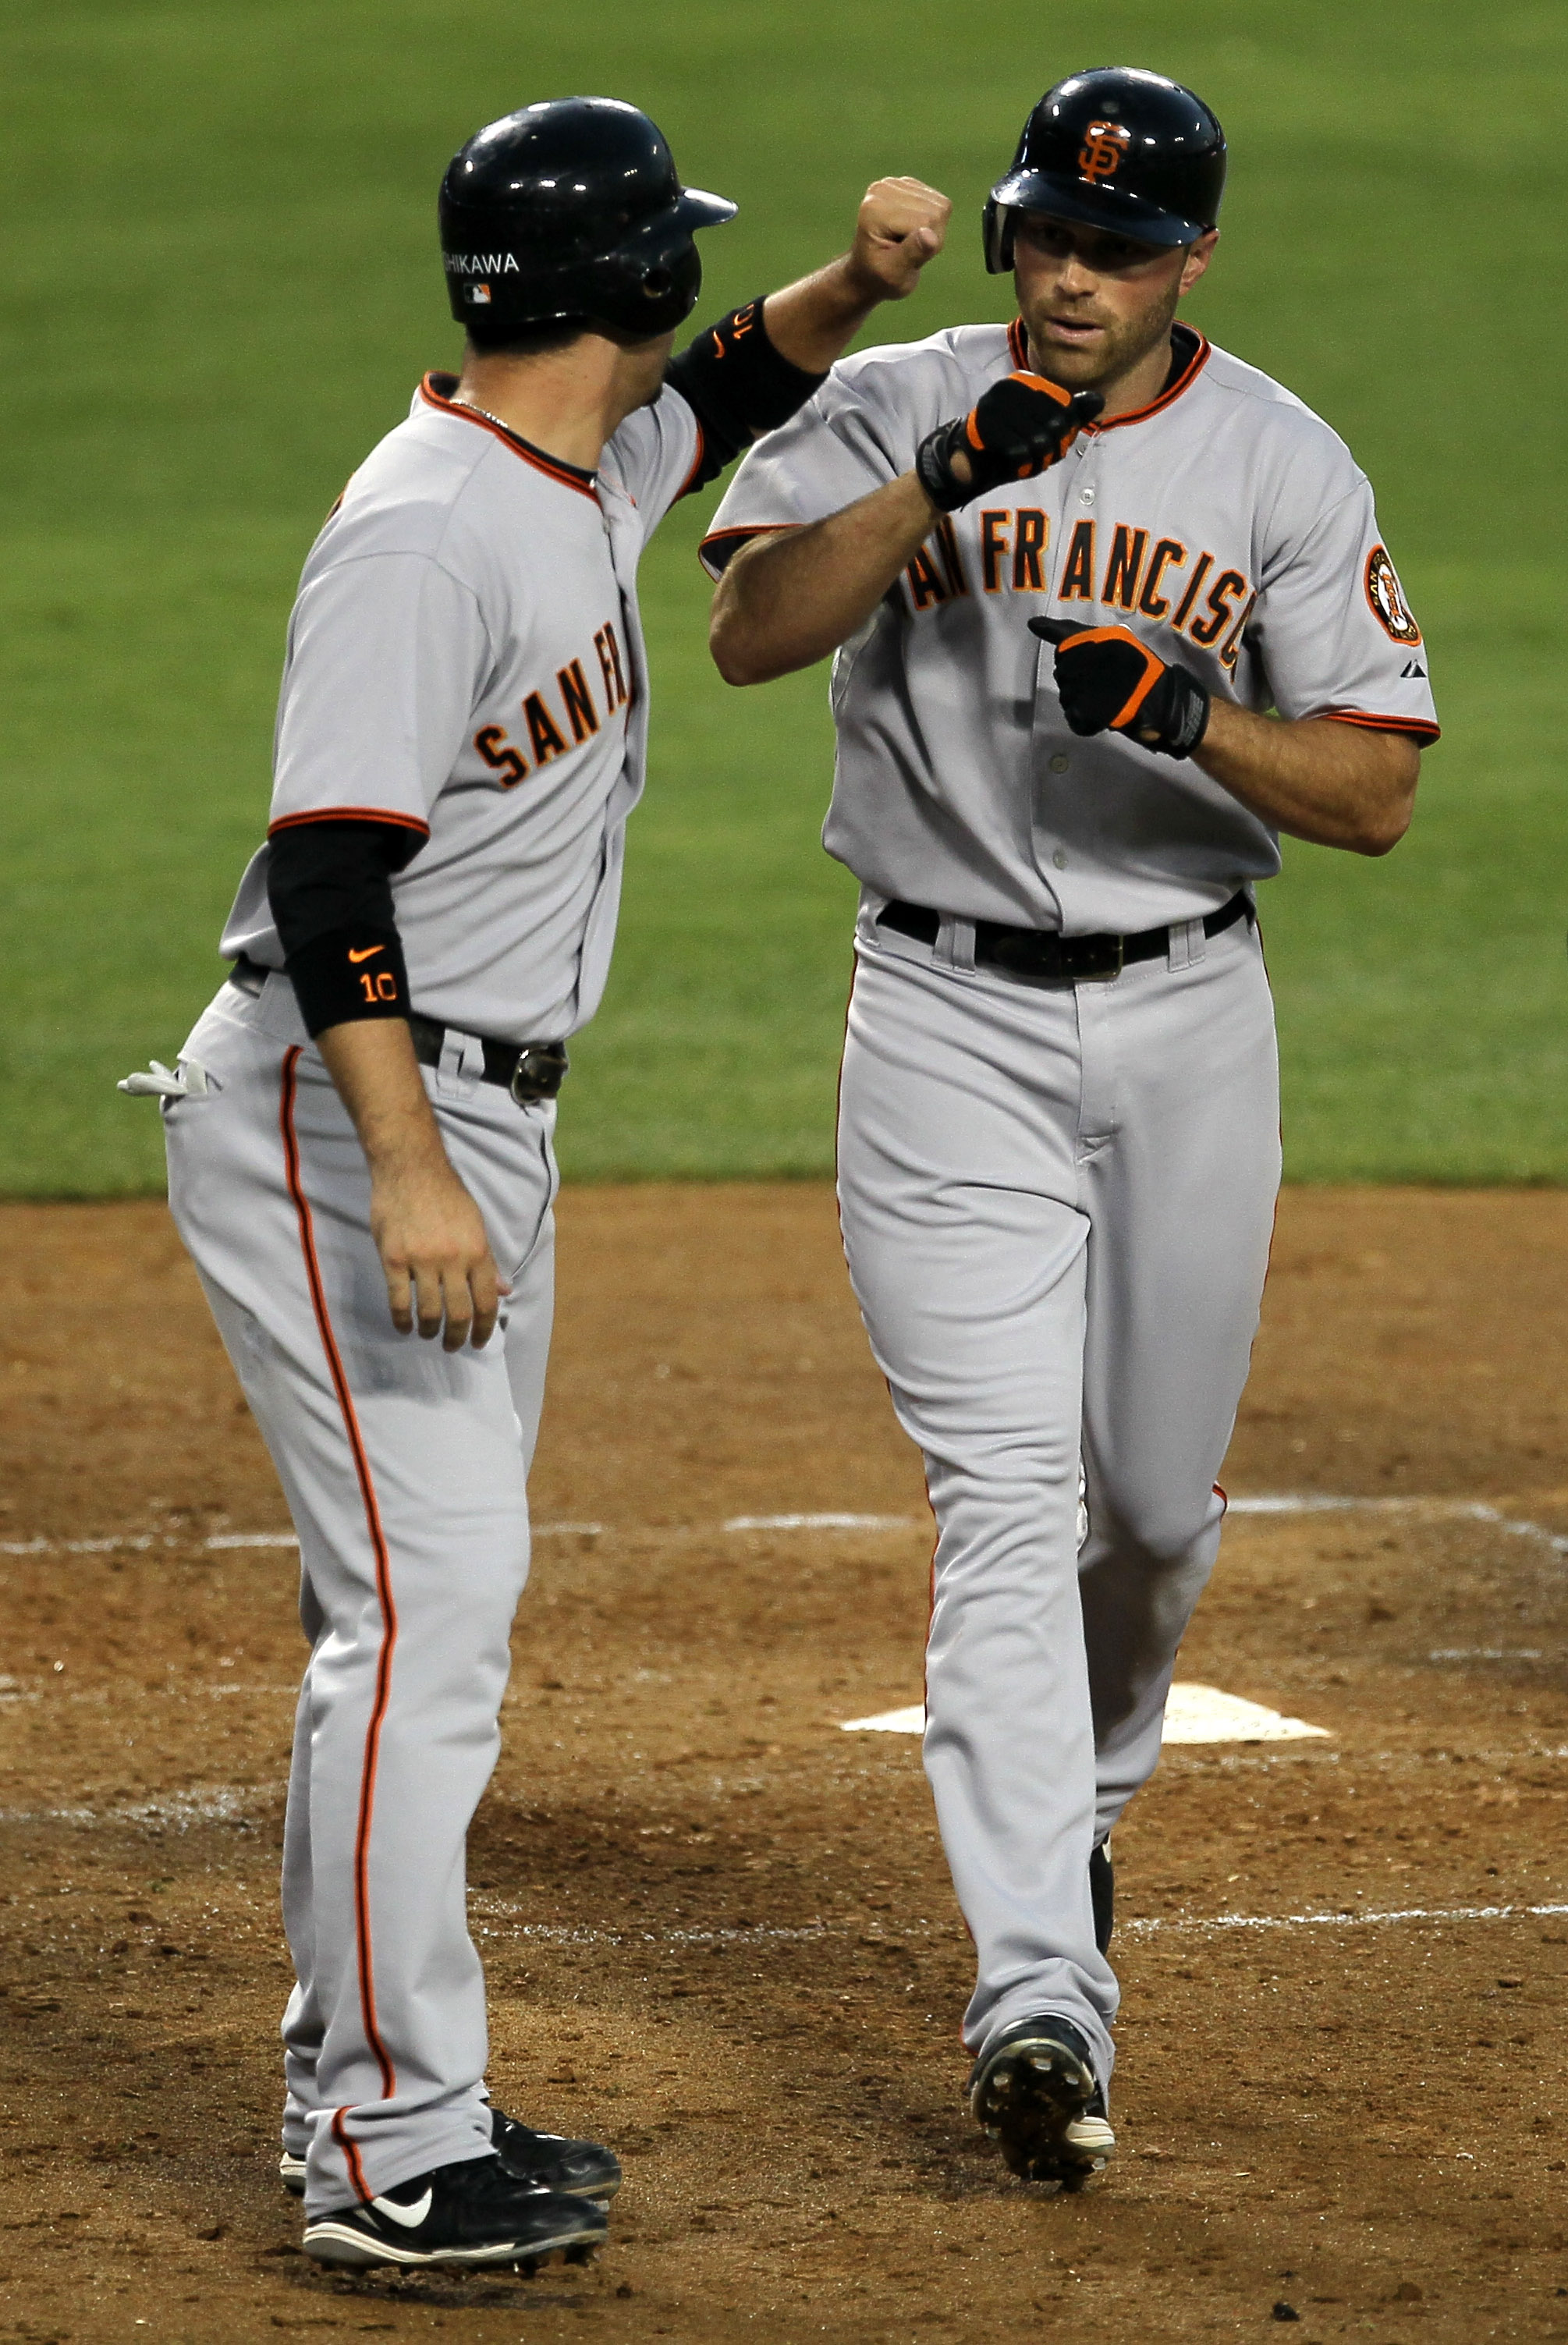 LOS ANGELES - JULY 19: Nate Schierholtz #12 (R) of the San Francisco Giants is greeted by Travis Ishikawa #10 after both score on Schierholtz' fourth inning home run against the Los Angeles Dodgers on July 19, 2010 at Dodger Stadium in Los Angeles, Califo